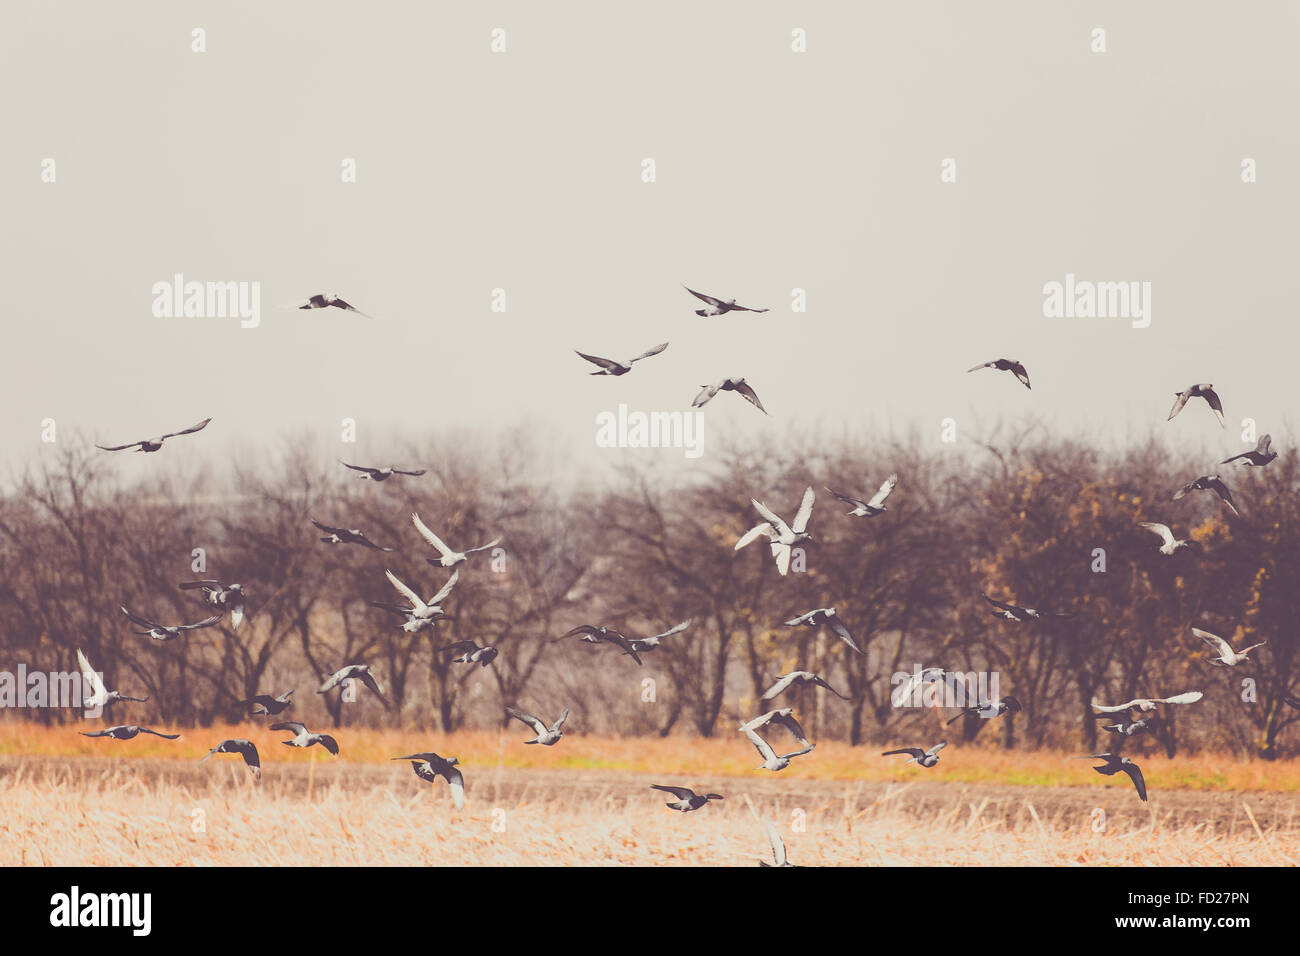 Sky with Birds in Autumn. Field of Grass, Forest Trees and Flying Birds. Pigeons Fly After Harvesting and Plowing Fields. Natura Stock Photo